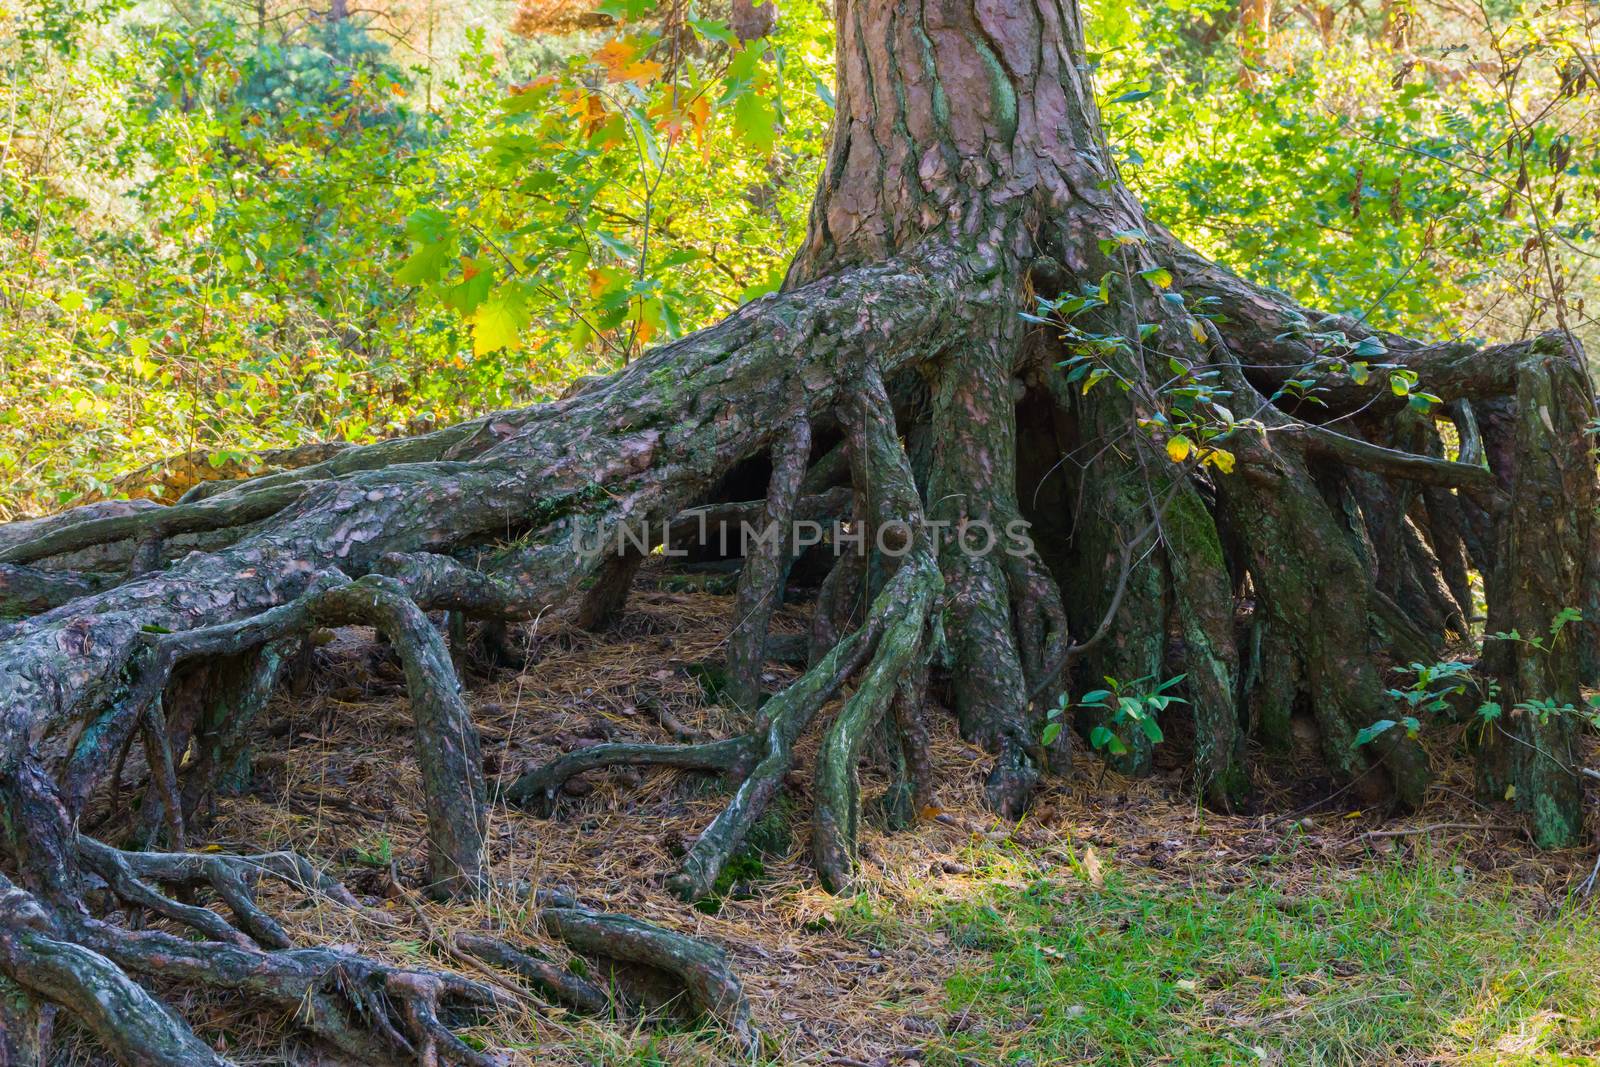 Enormously big bare tree roots above the ground in a forest landscape scene